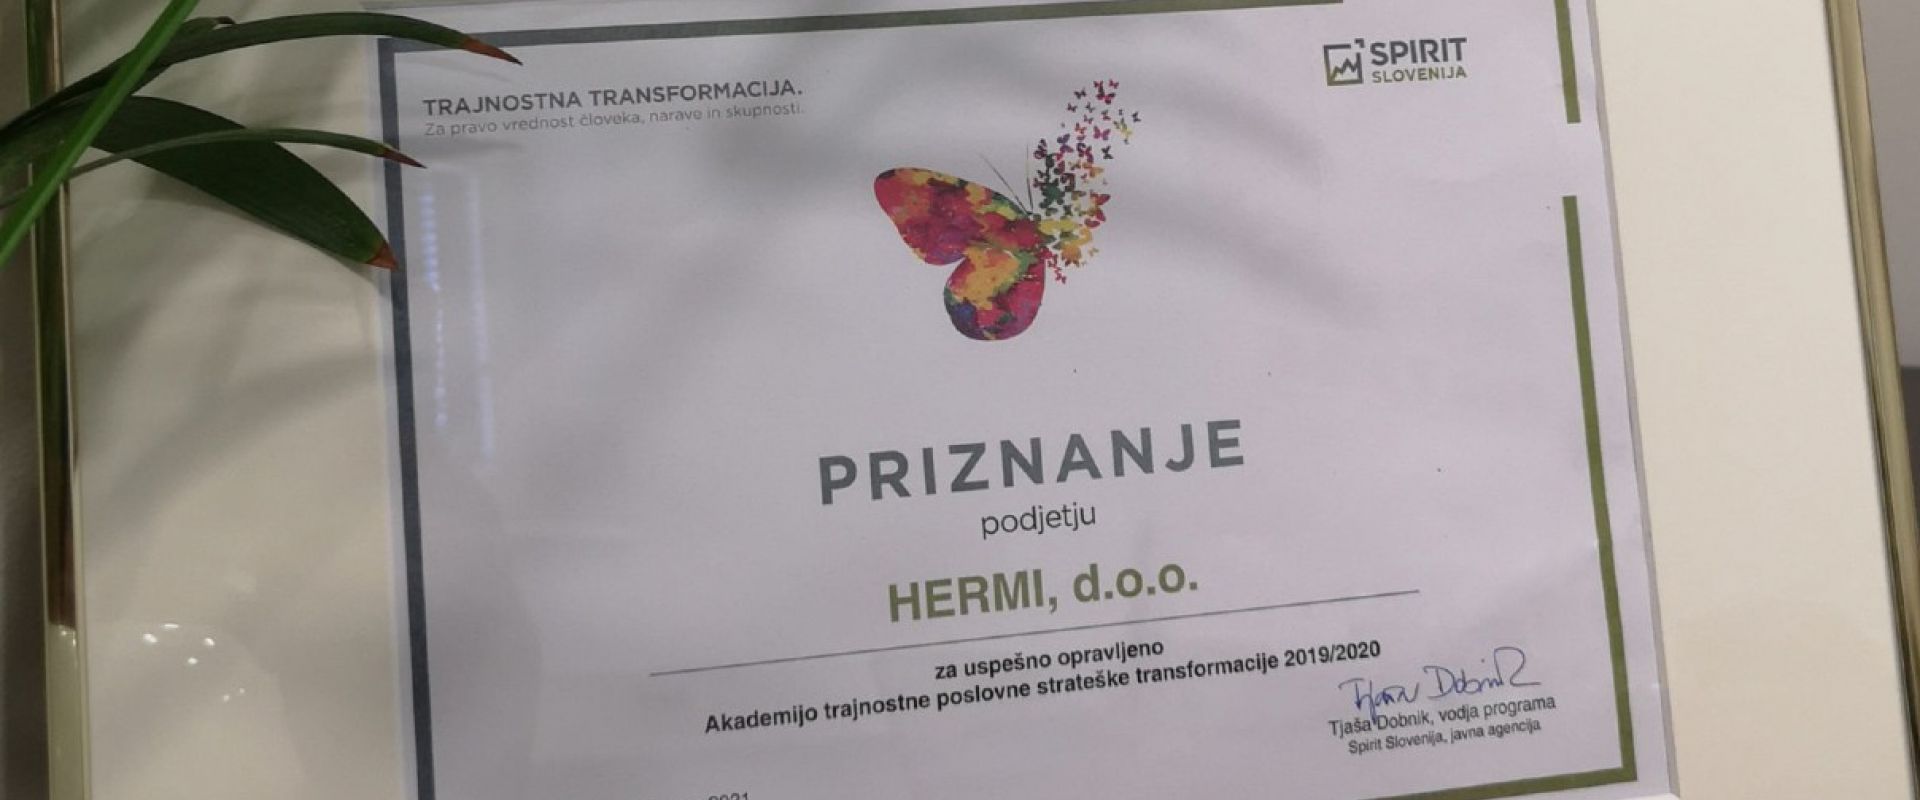 Hermi receives official recognition for initiating a sustainable business transformation